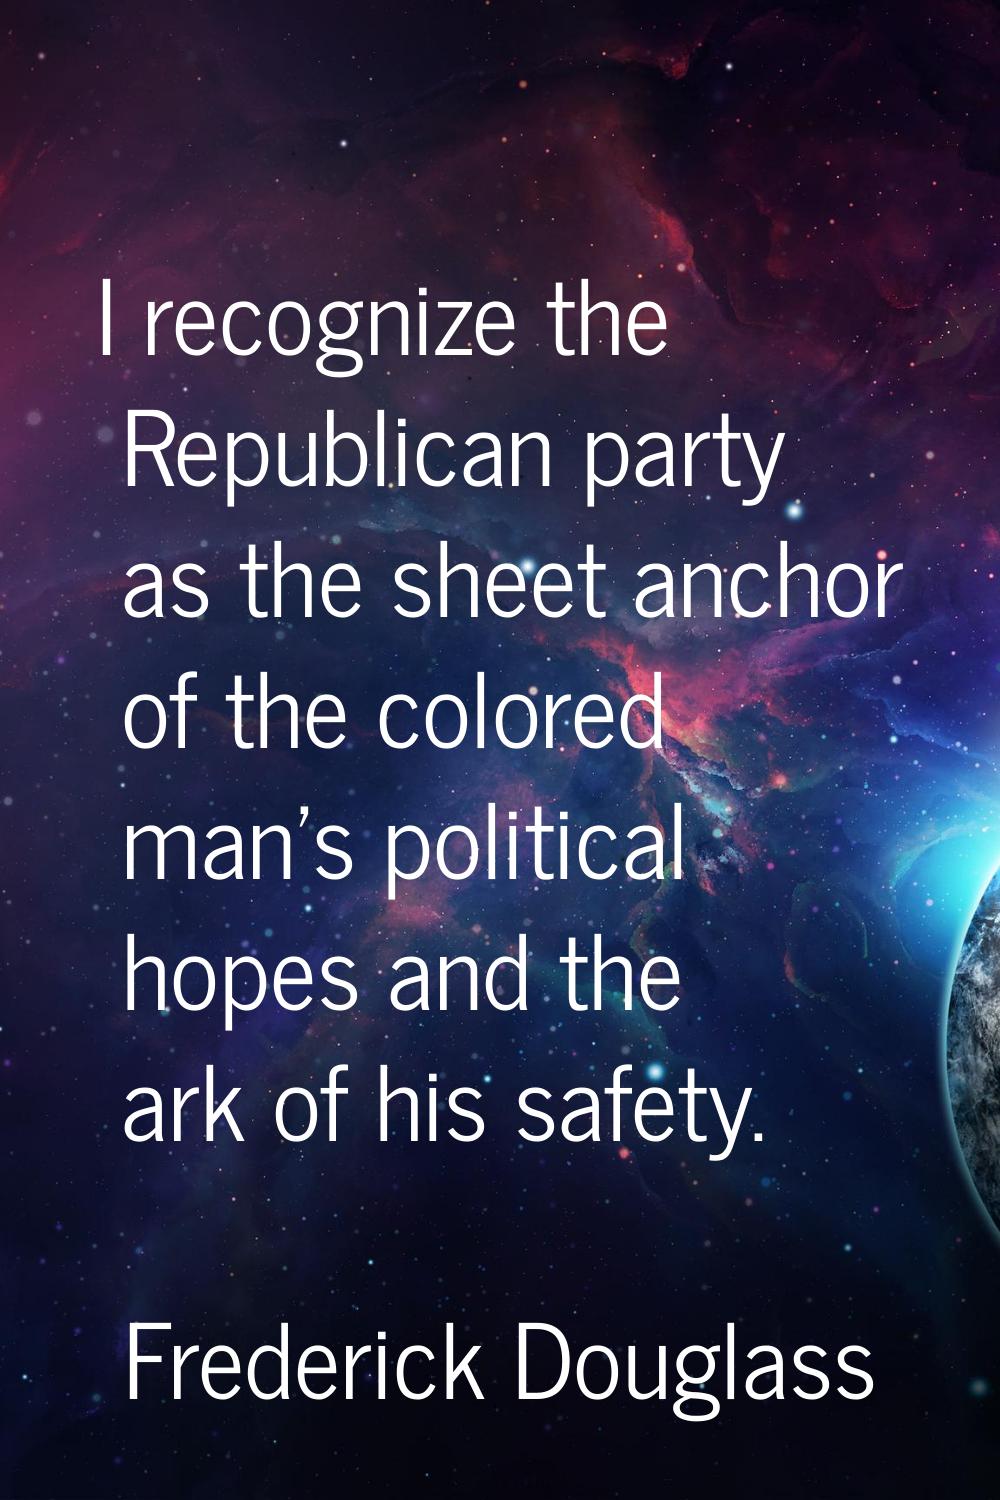 I recognize the Republican party as the sheet anchor of the colored man's political hopes and the a